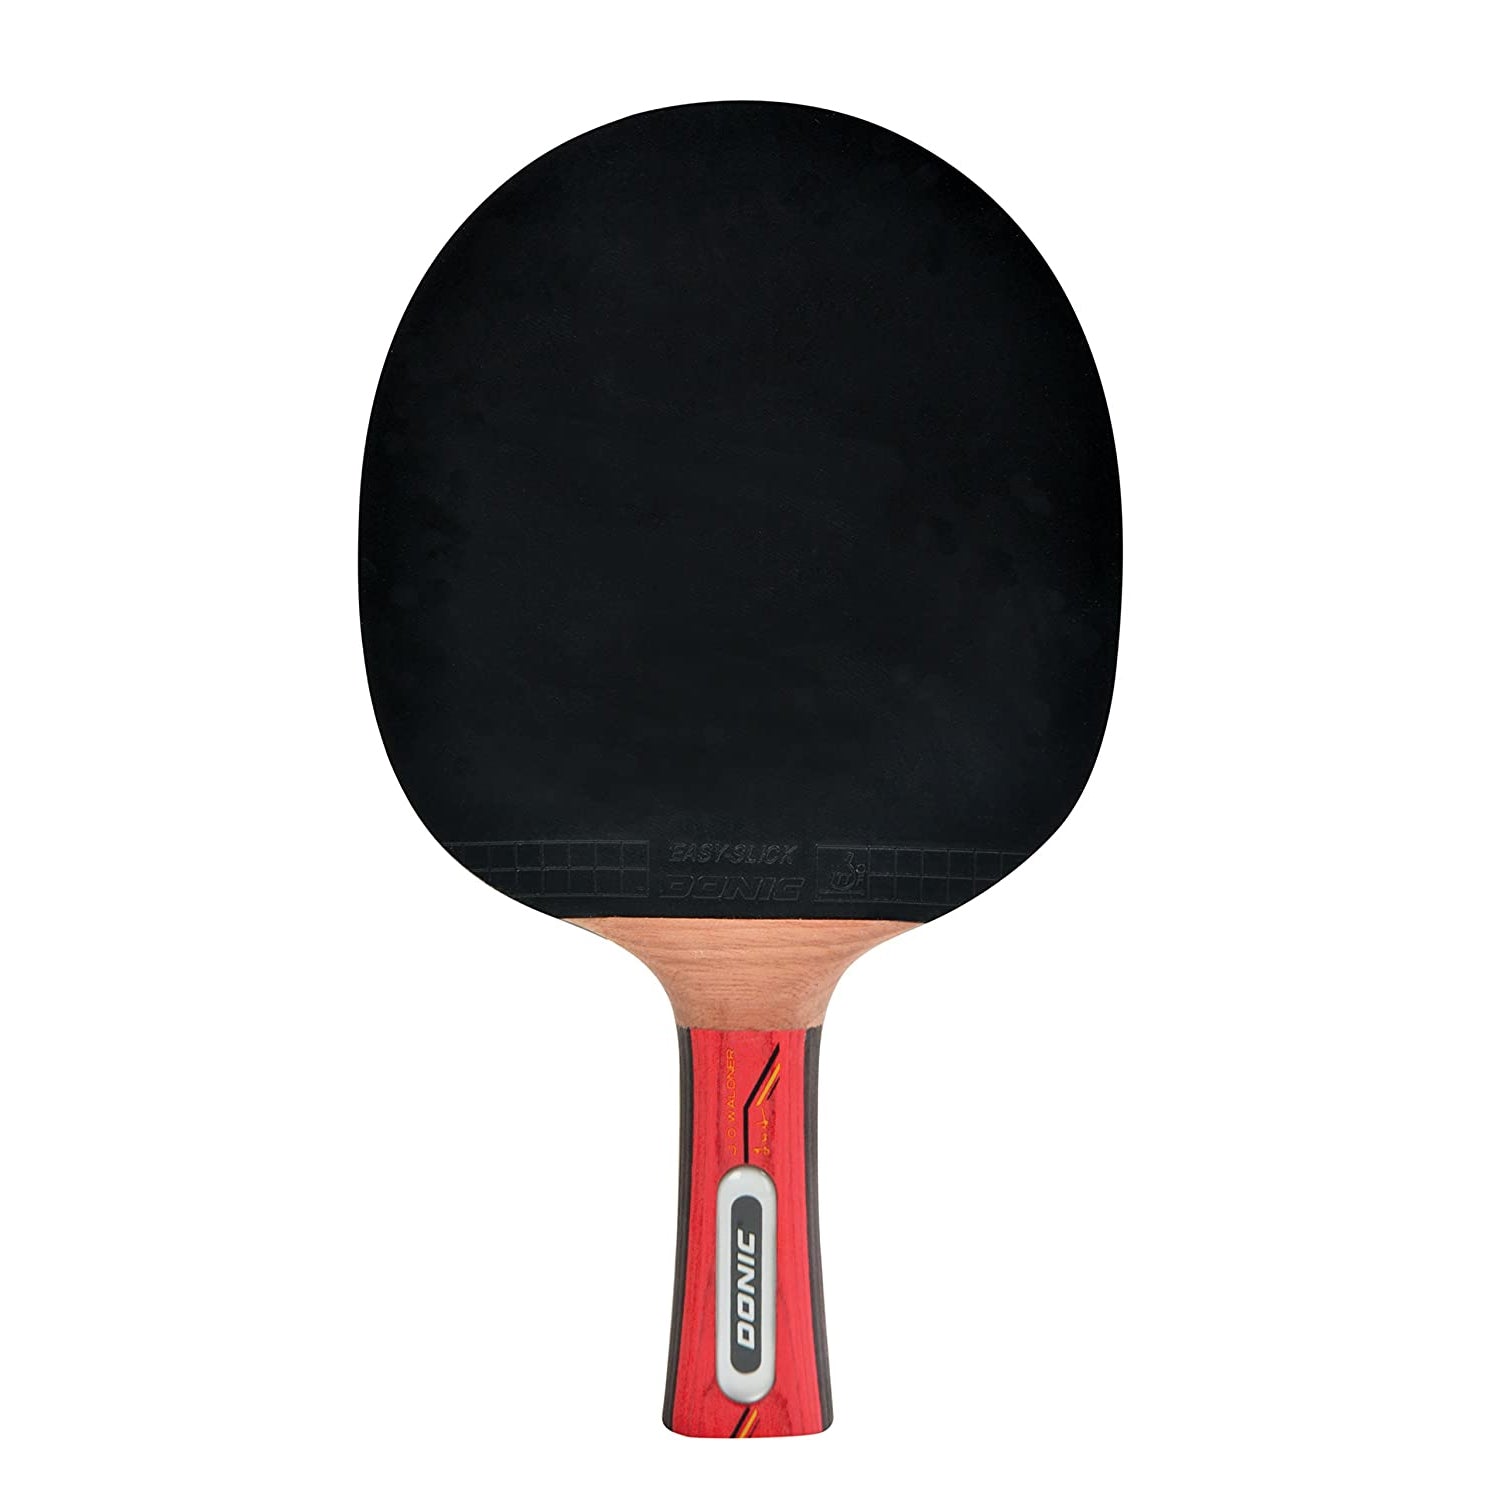 Donic Waldner 1000 Table Tennis Bat with Cover - Best Price online Prokicksports.com